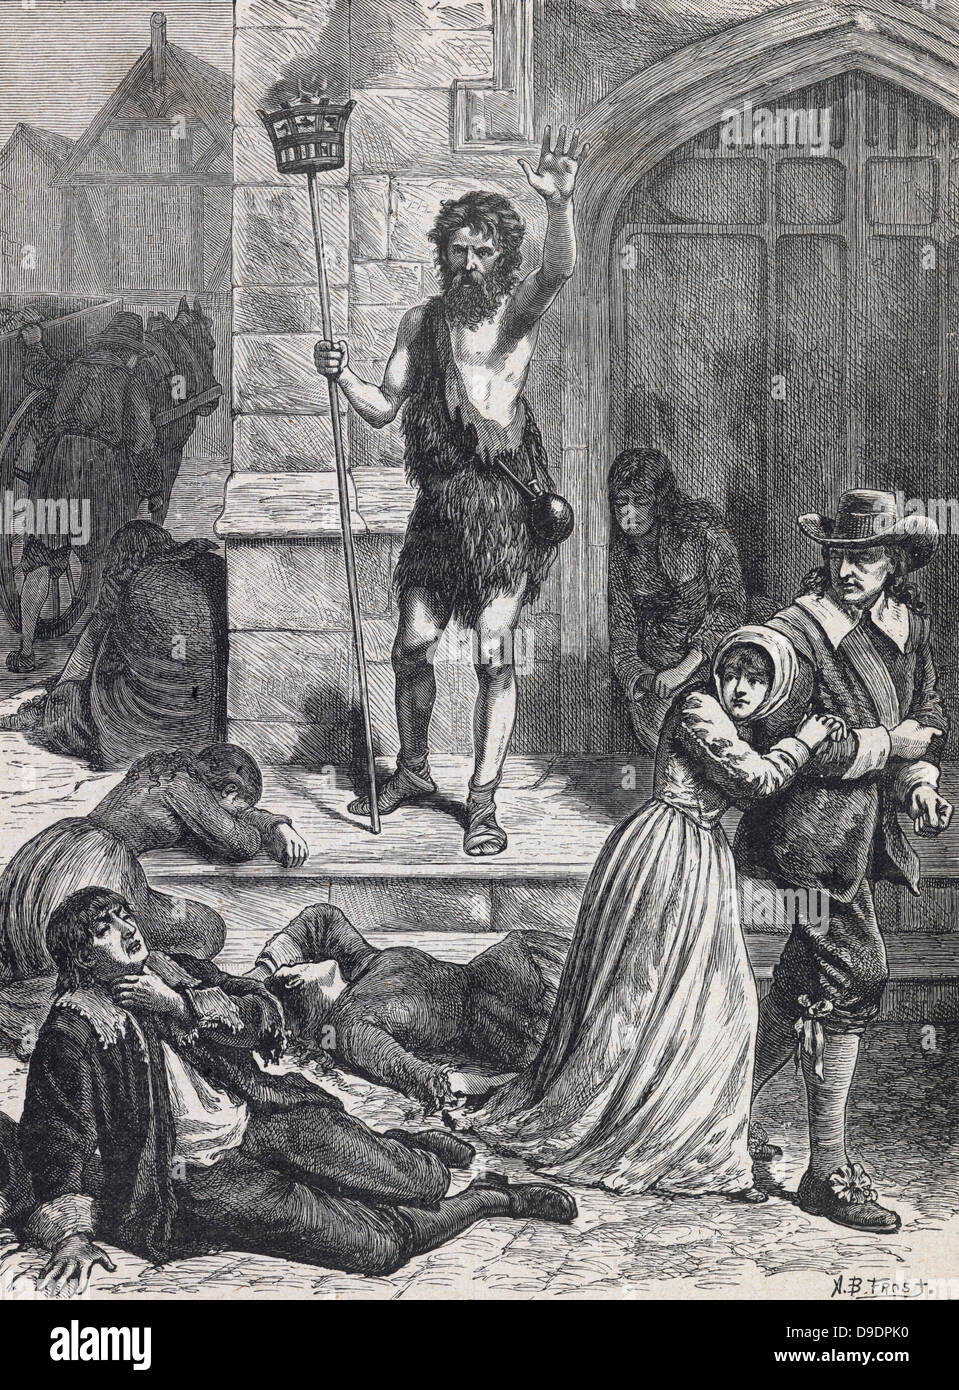 The Great Plague of London, 1665.   The Manic preaching doom and disaster. Engraving c1880. Stock Photo